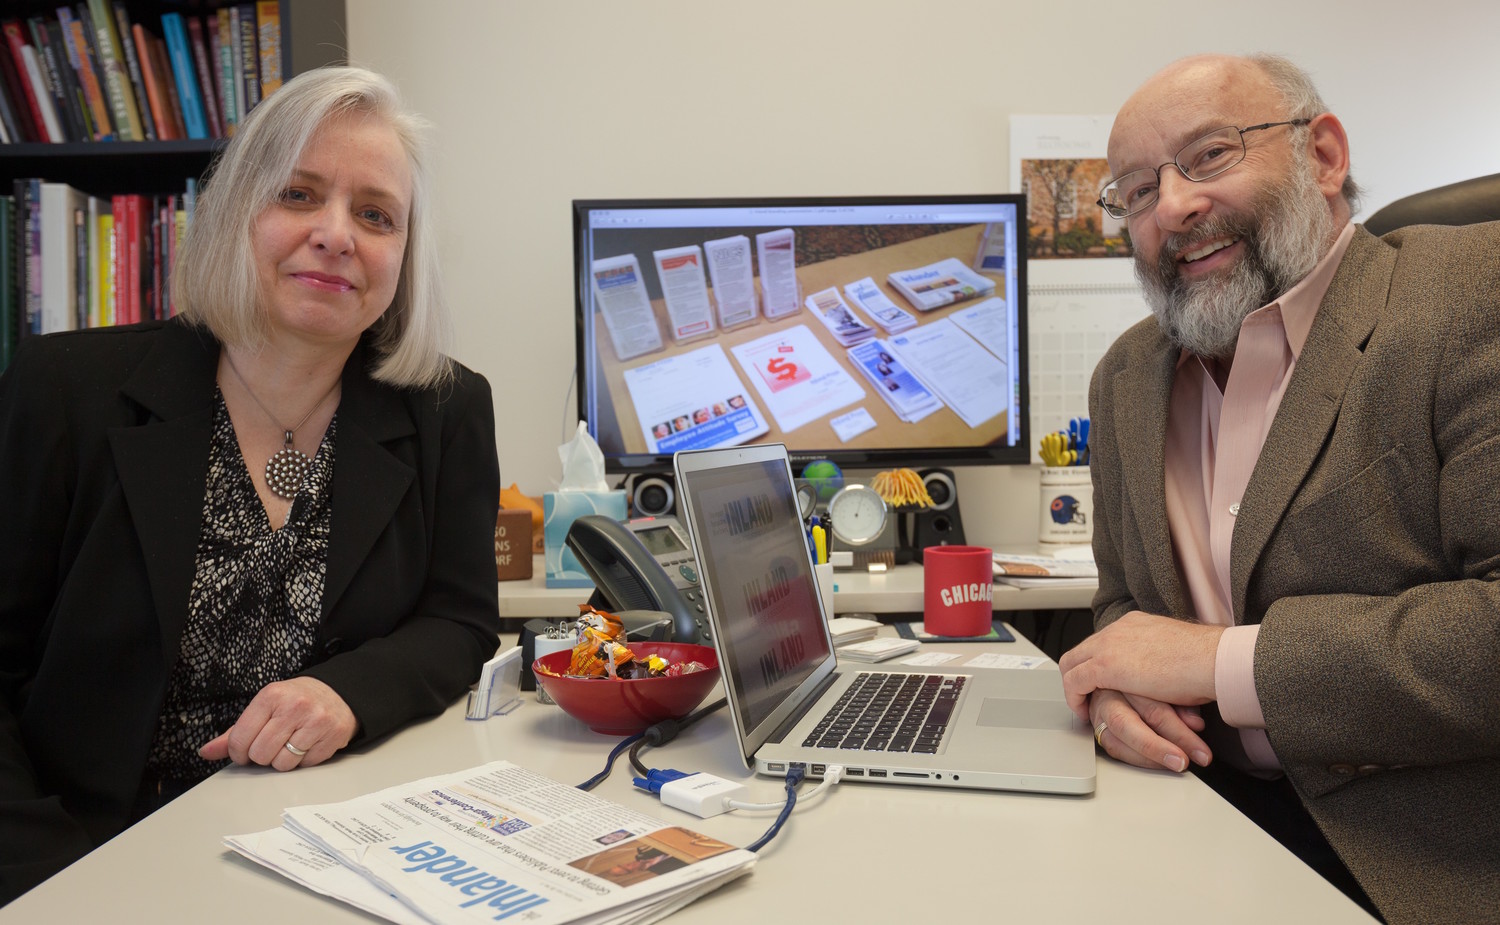 Lynn and Bill pose for a marketing photo requested by the Rhode Island Economic Development Corporation while working on a rebranding project for the Inland Press Association.